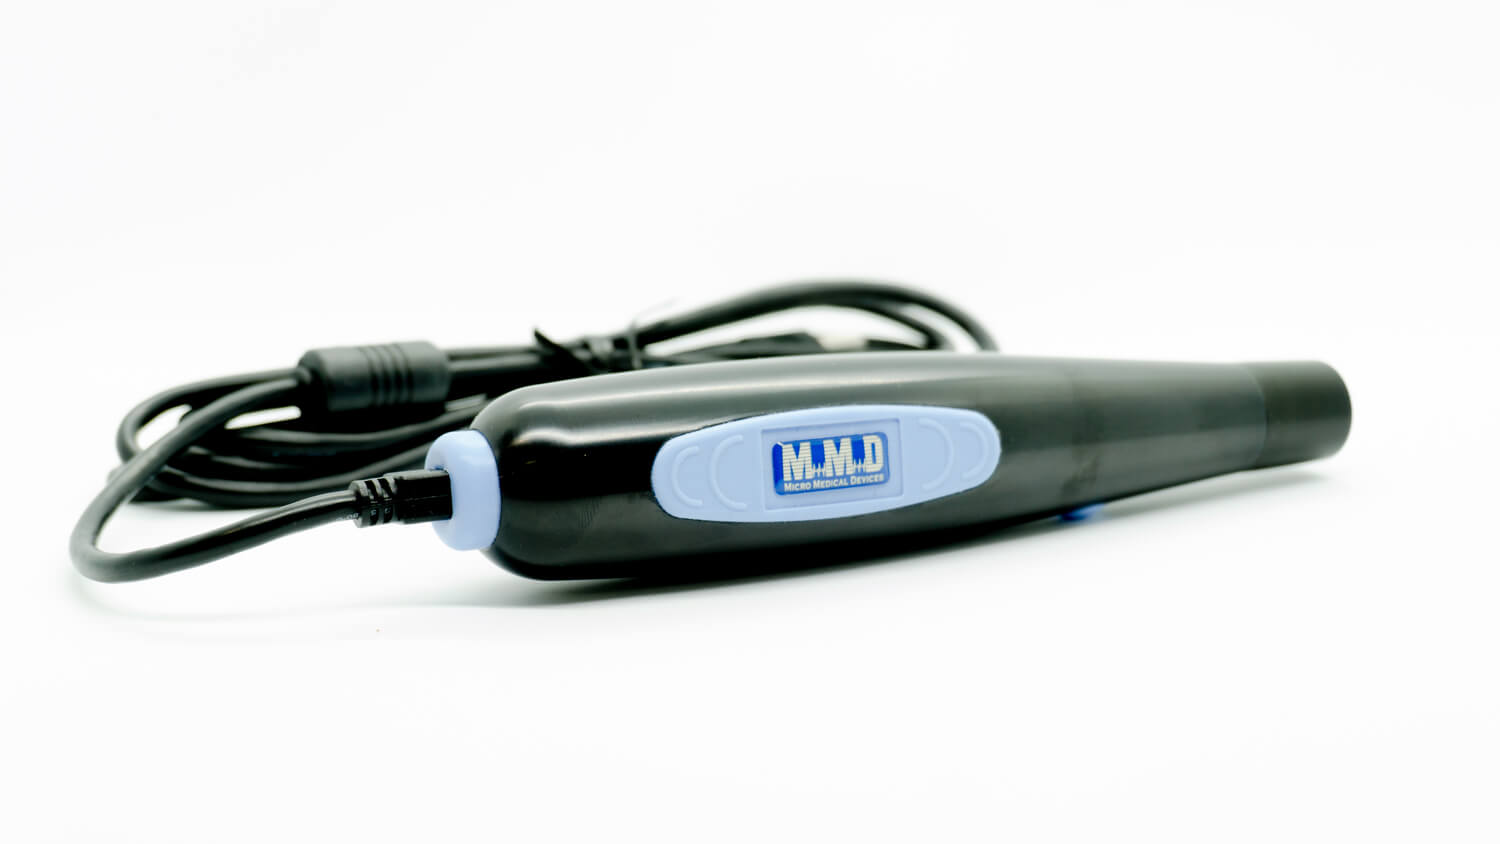 B scan USB ultrasound probe from Micro Medical Devices